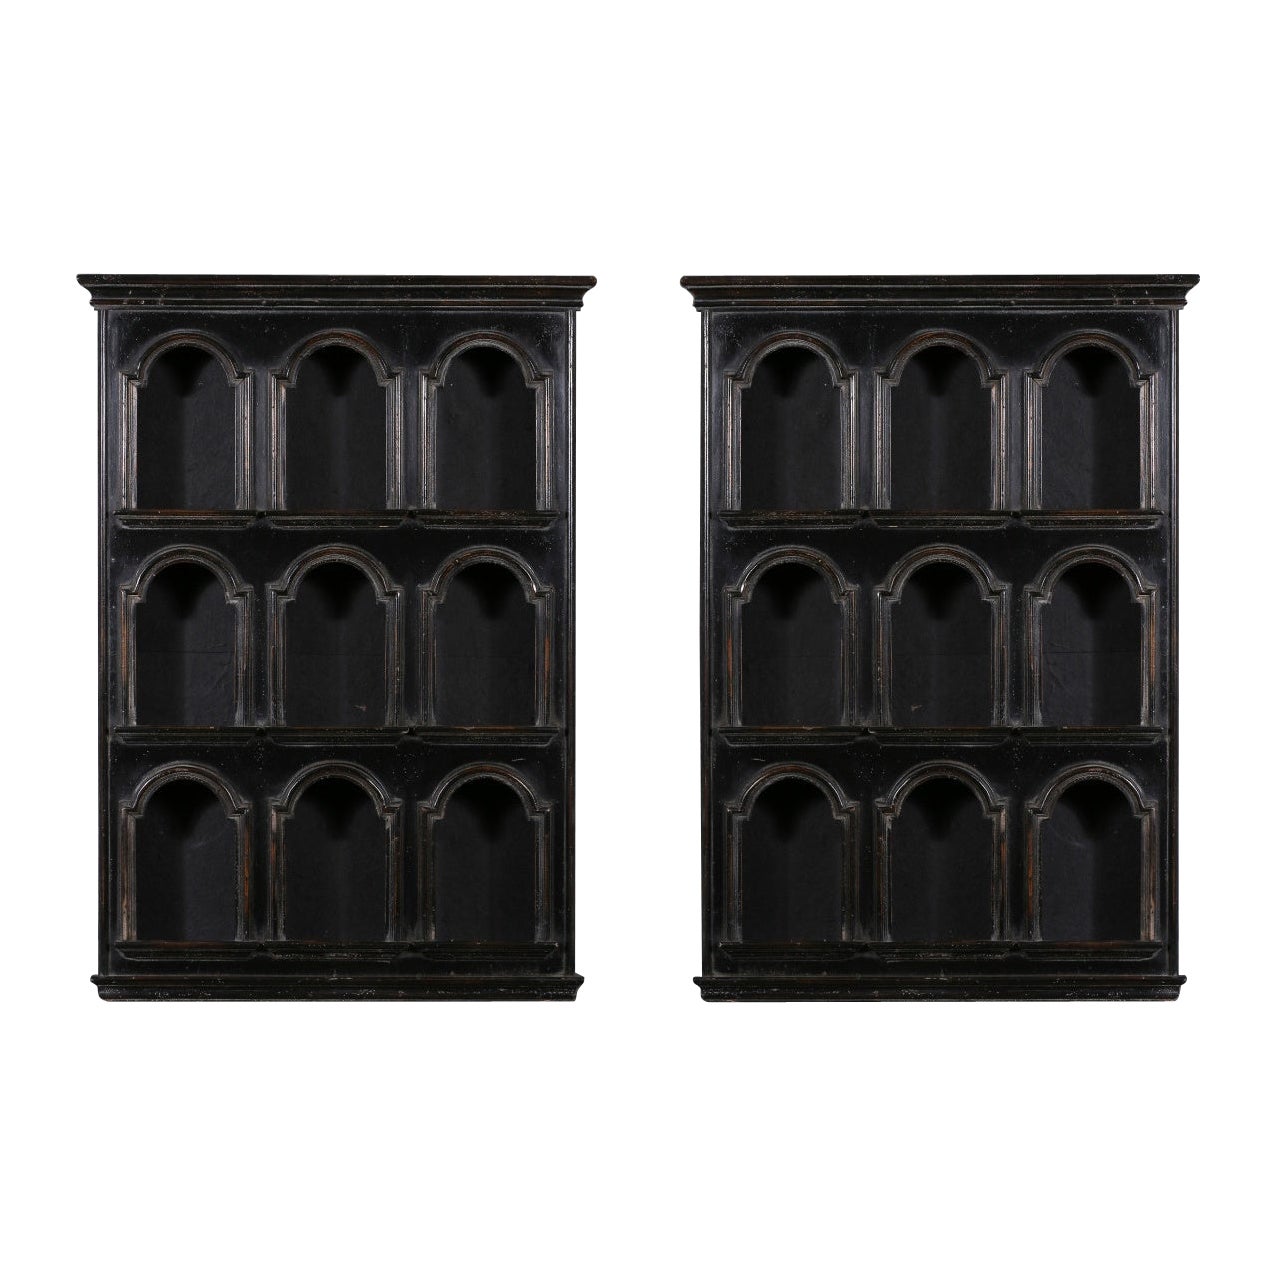 Pair of Small Curiosity Wall Units or Small Bookcases, 20th Century.